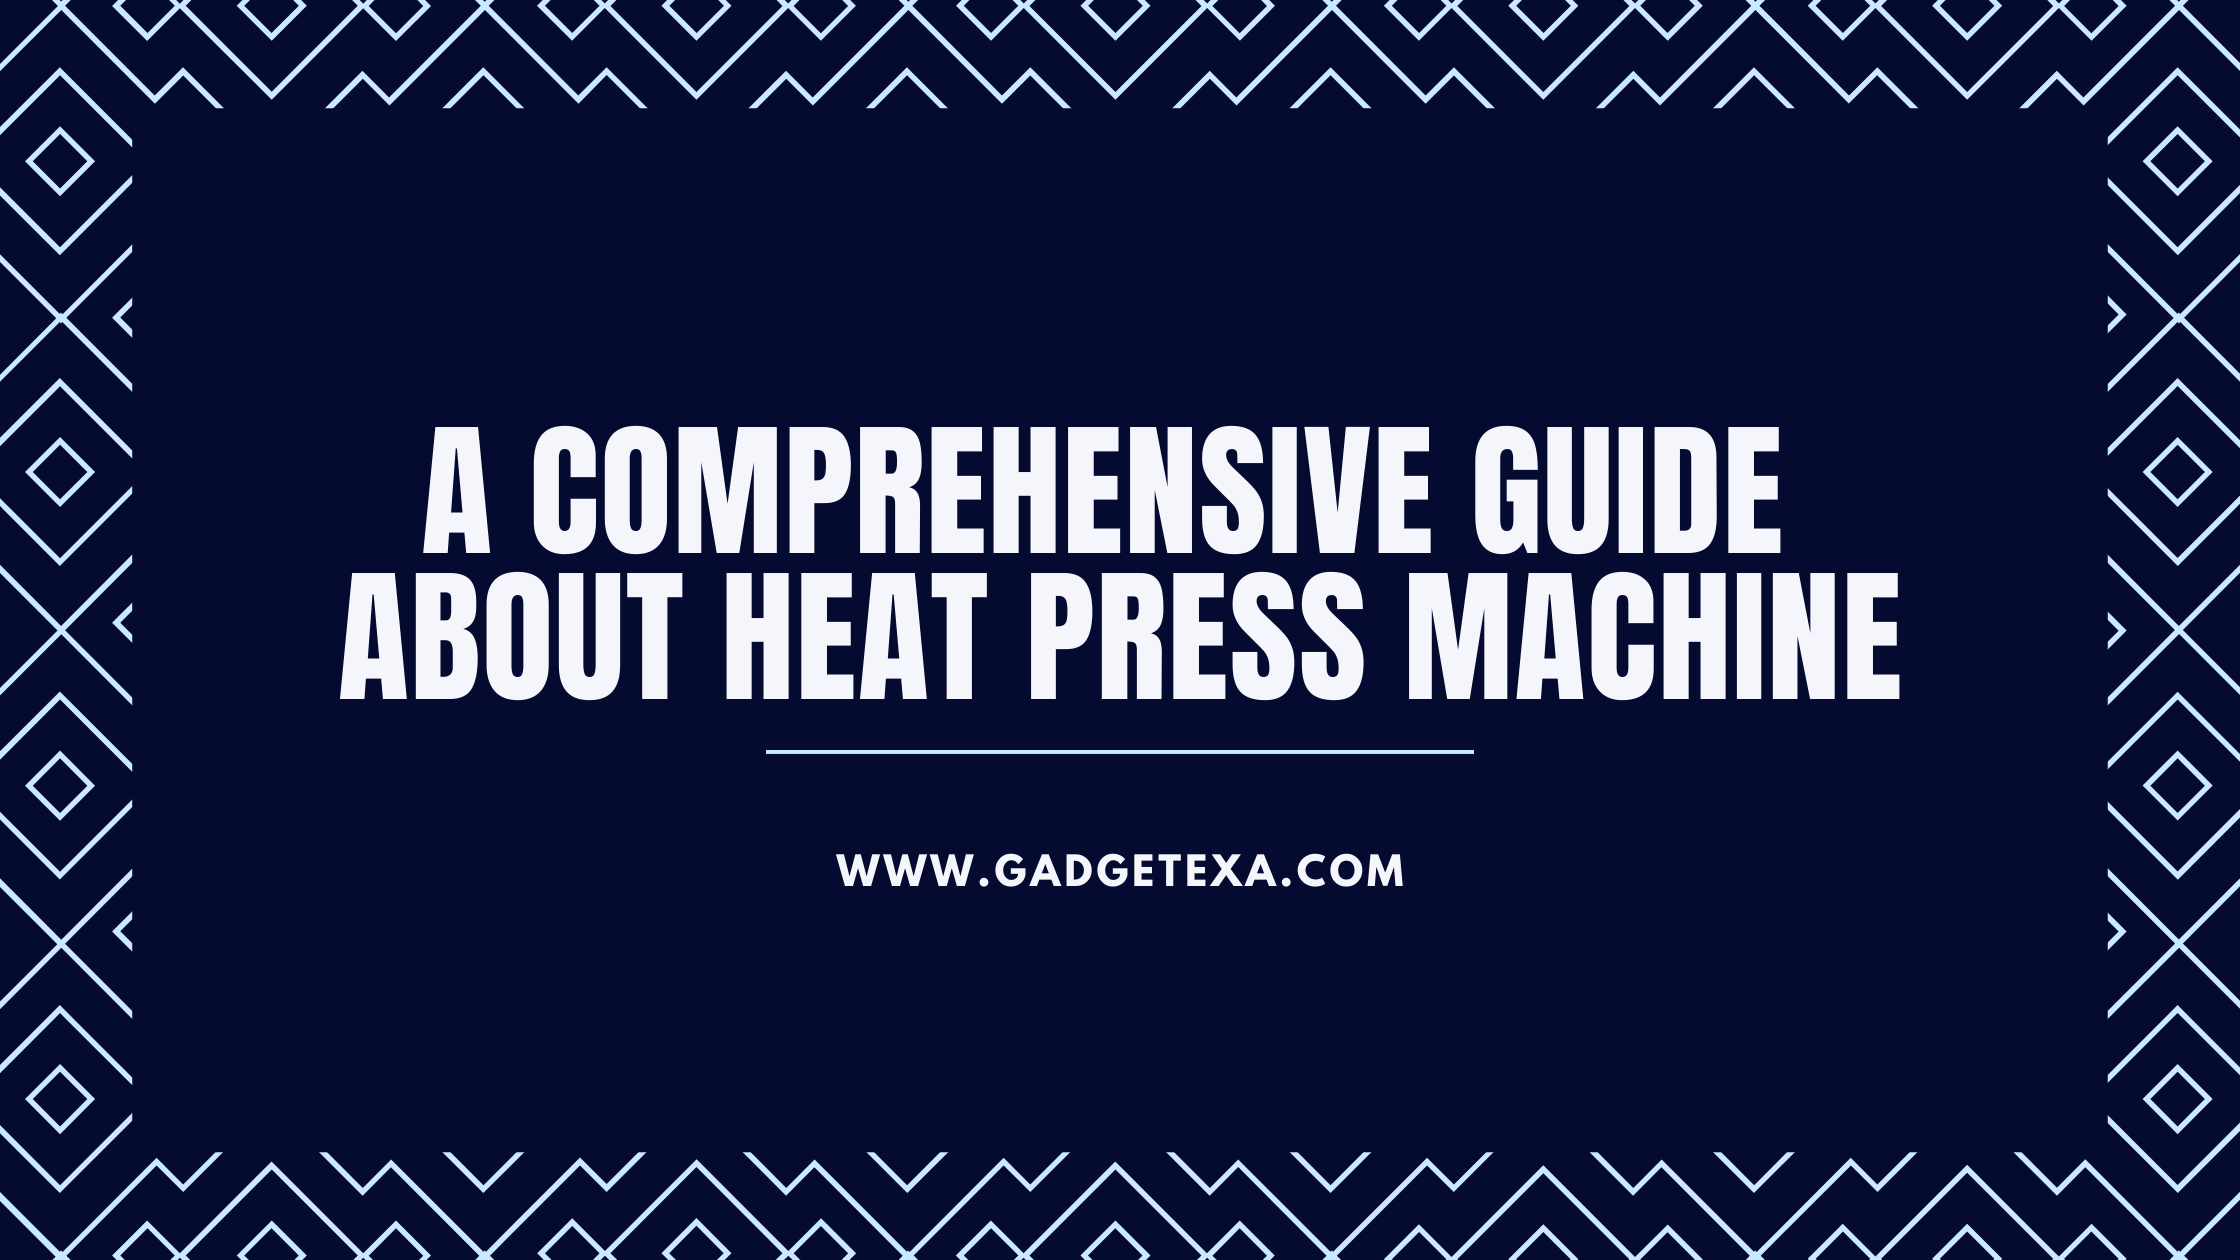 You are currently viewing A comprehensive guide about heat press machine | Read now